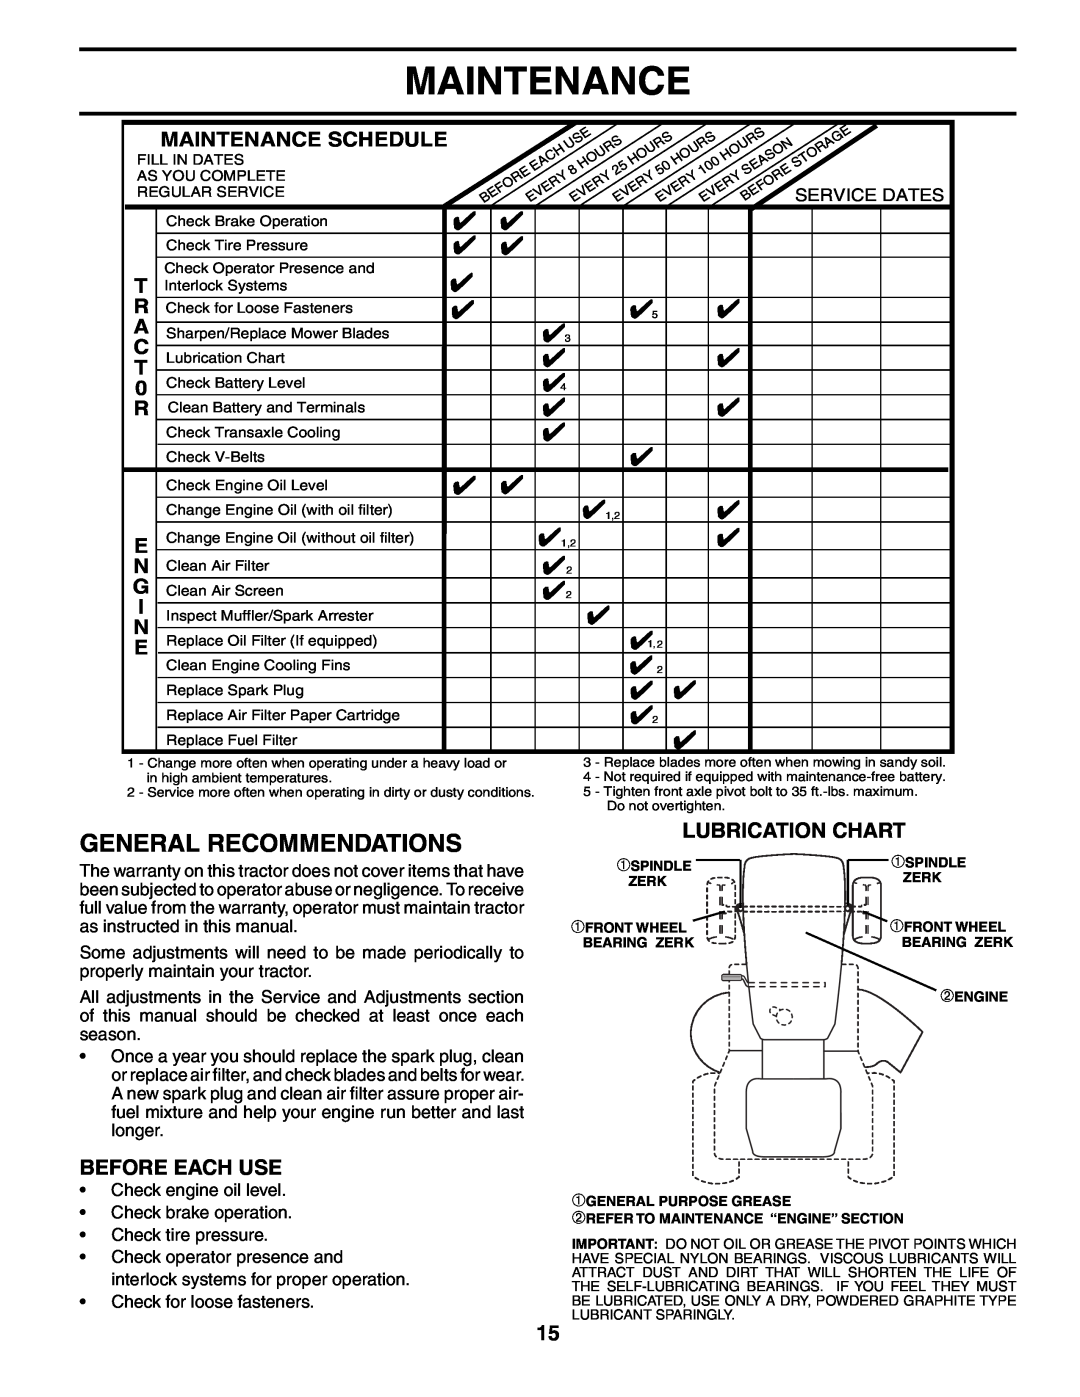 Poulan 184523, 954569561 manual Maintenance, General Recommendations, Lubrication Chart, Before Each Use 